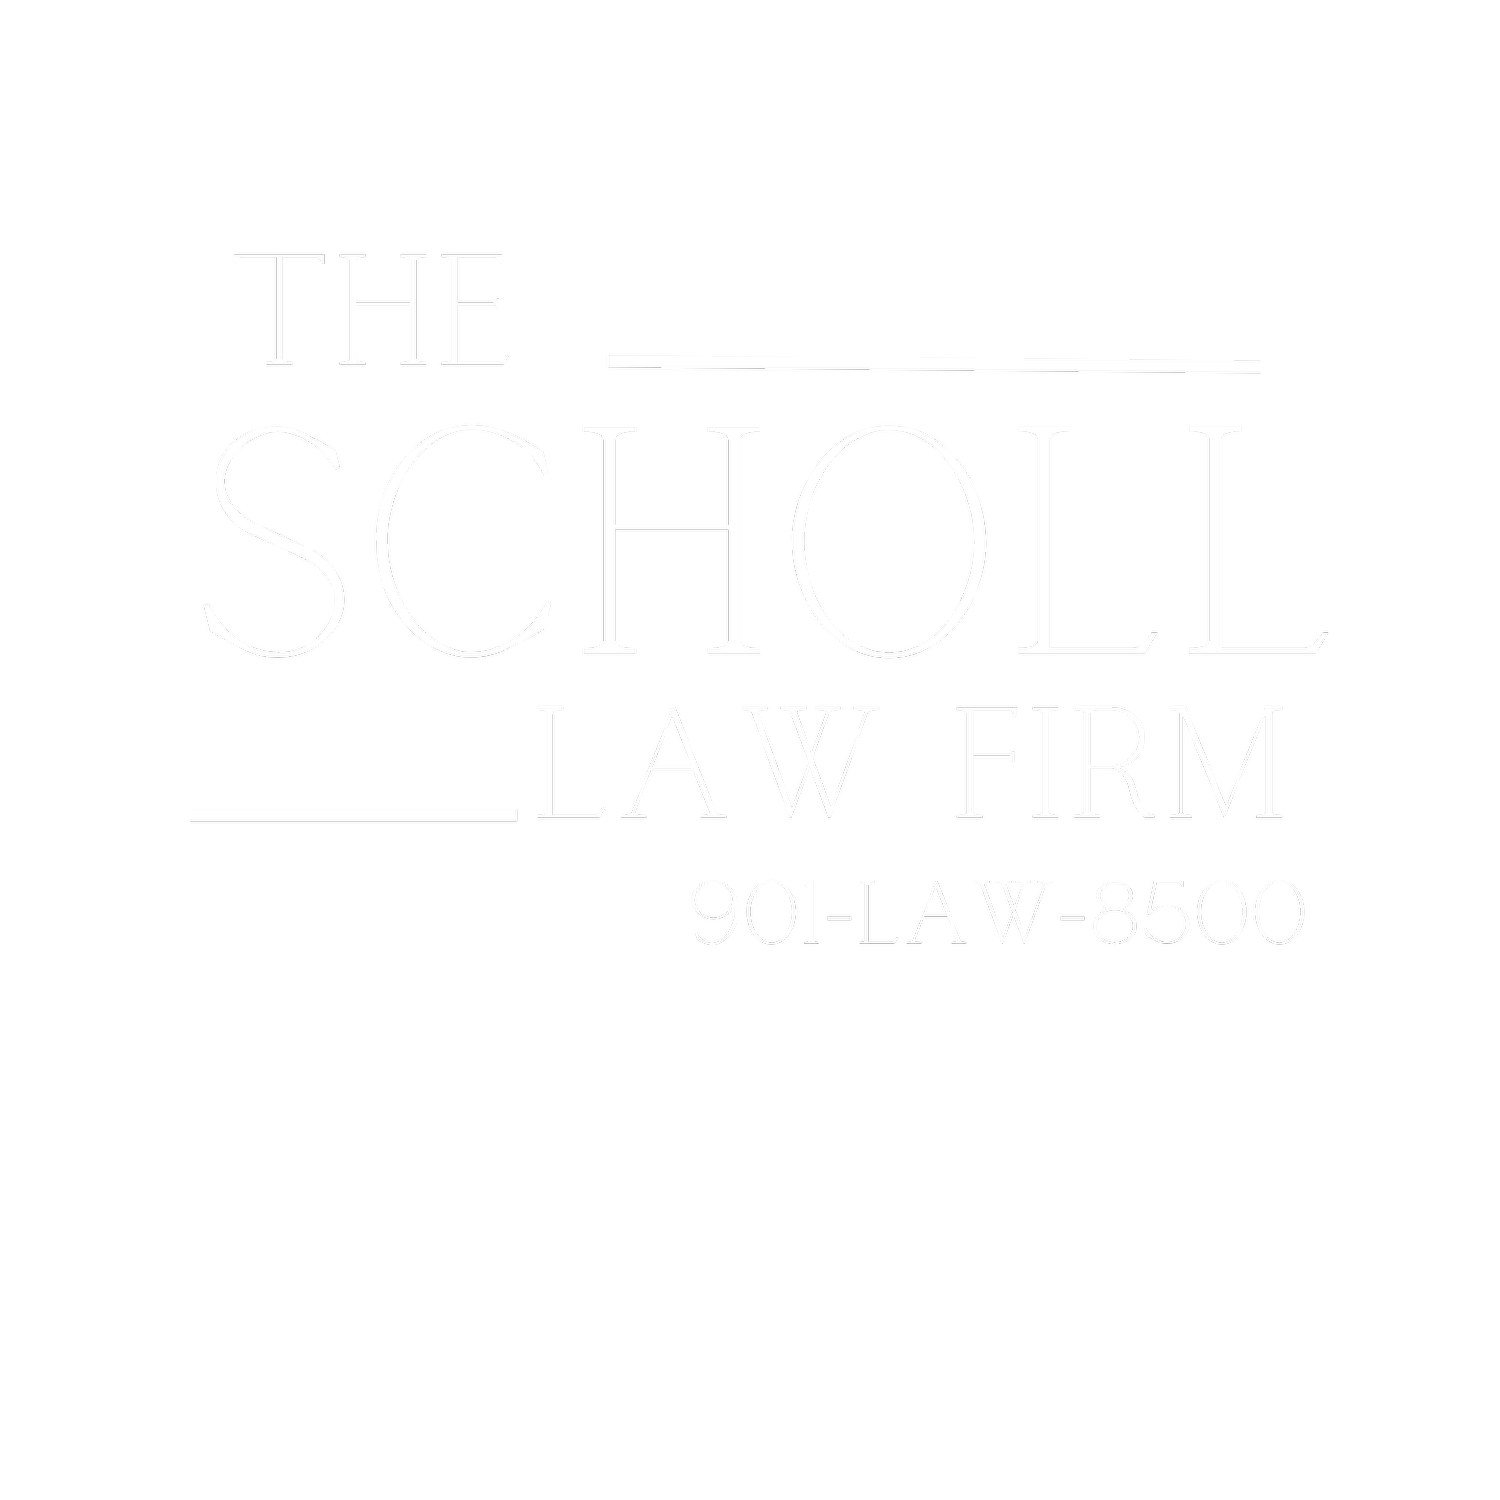 The Scholl Law Firm